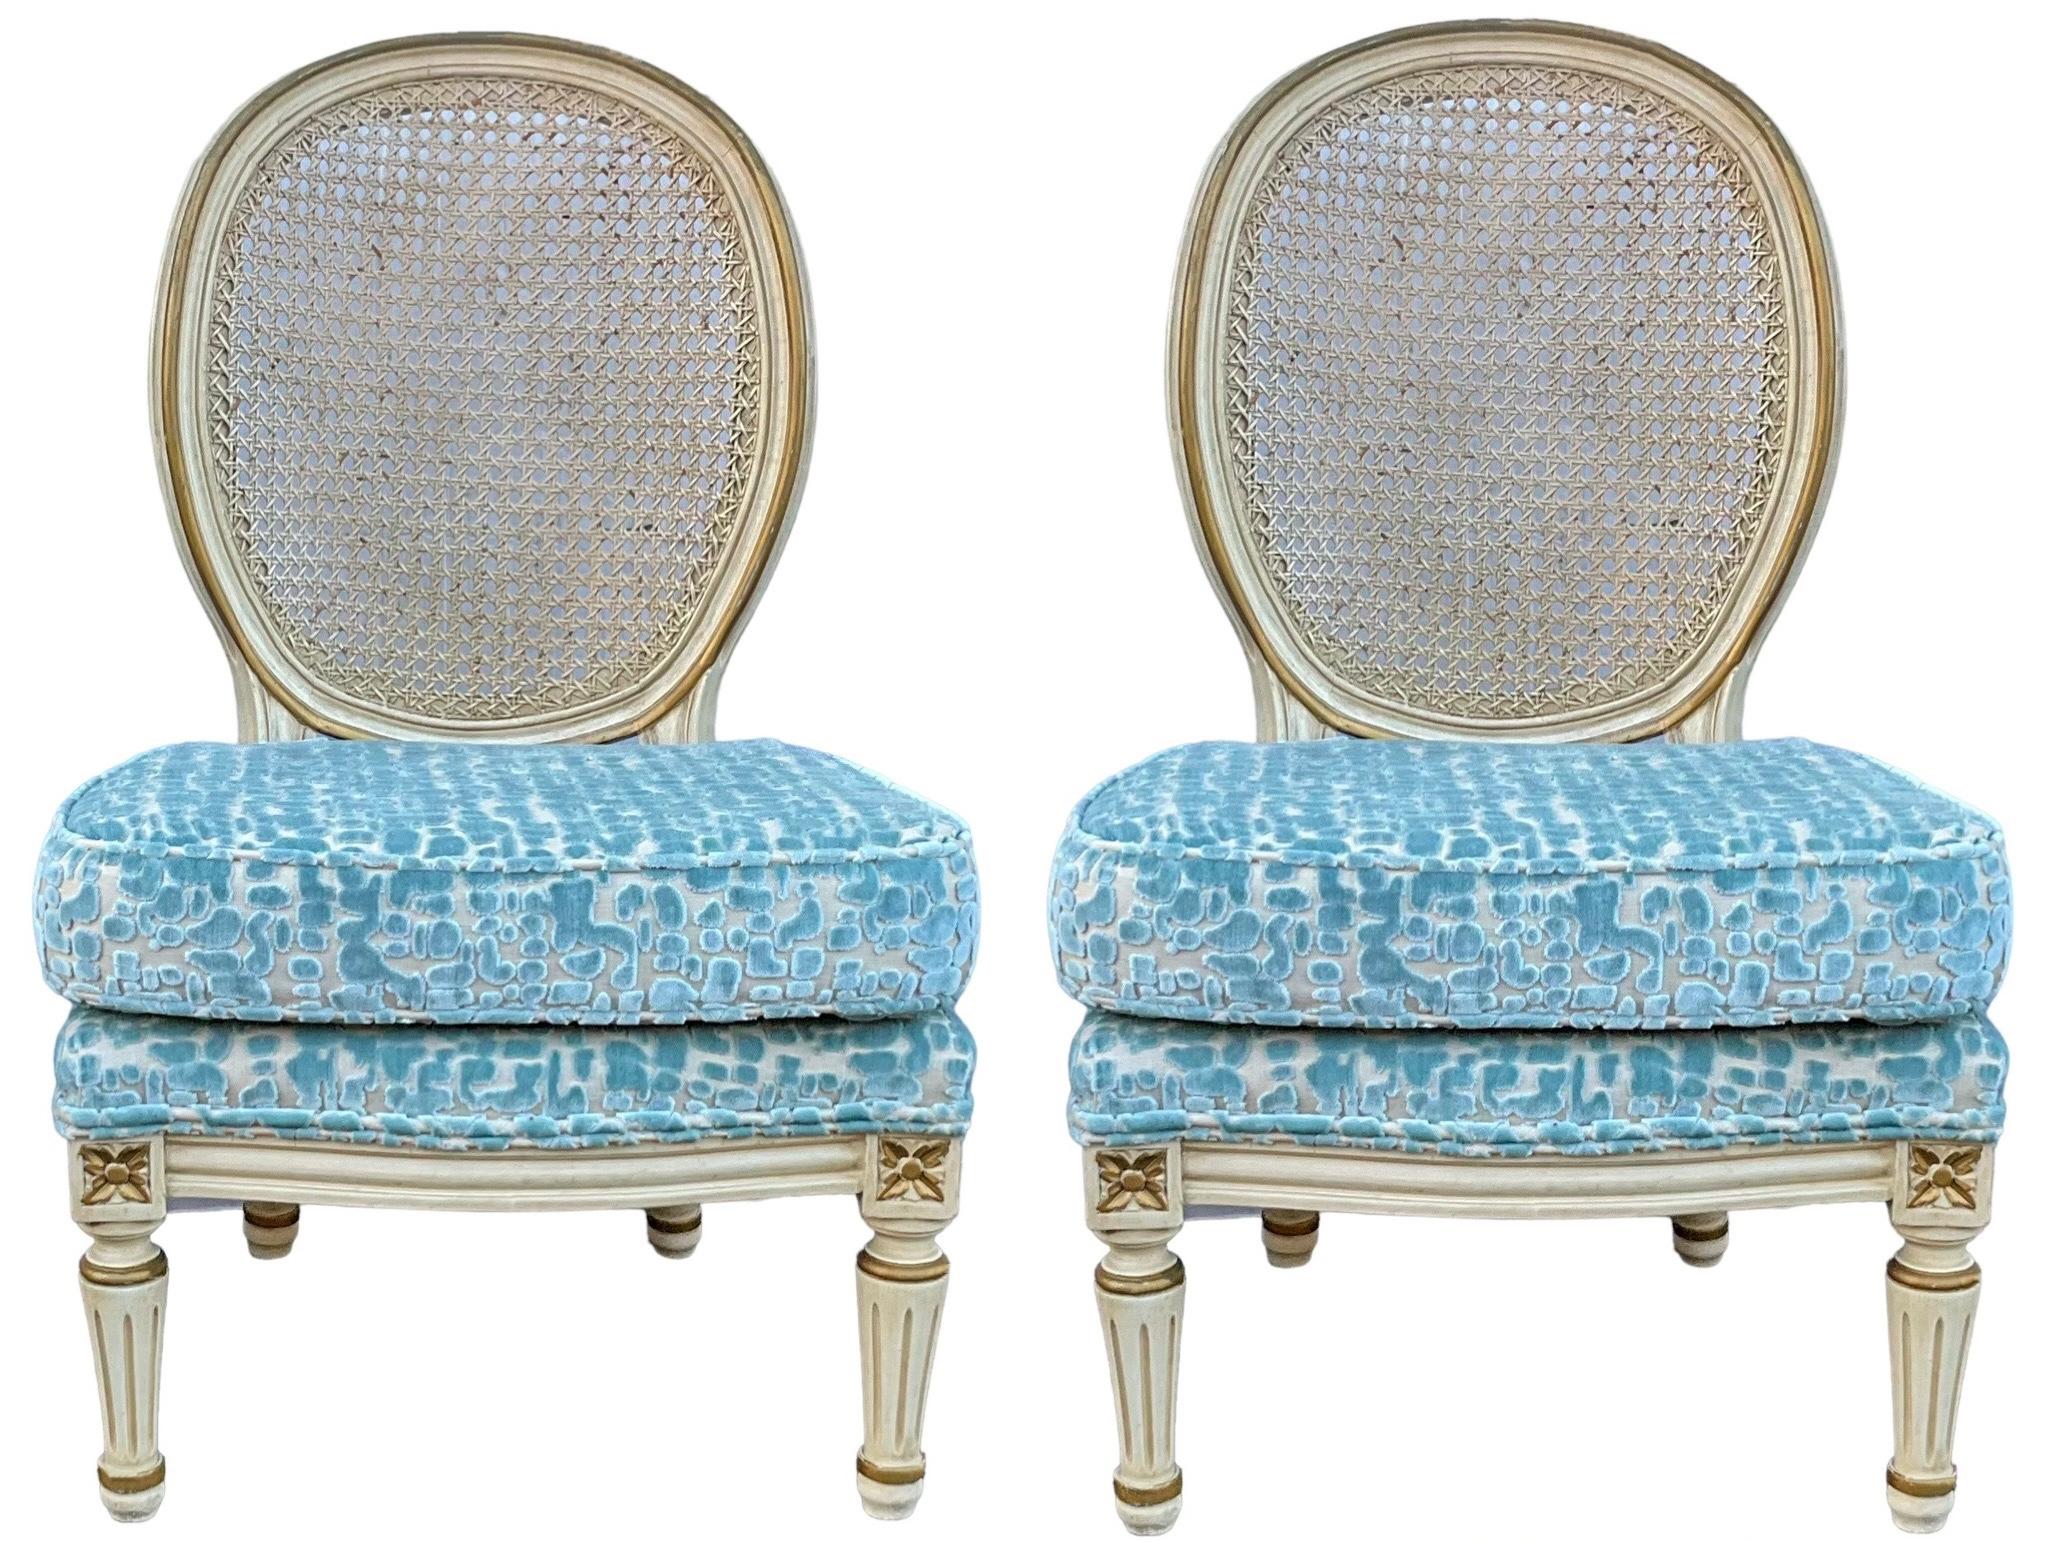 Hollywood Regency Era French Style Painted Slipper Chairs In Cut Velvet -Pair For Sale 1